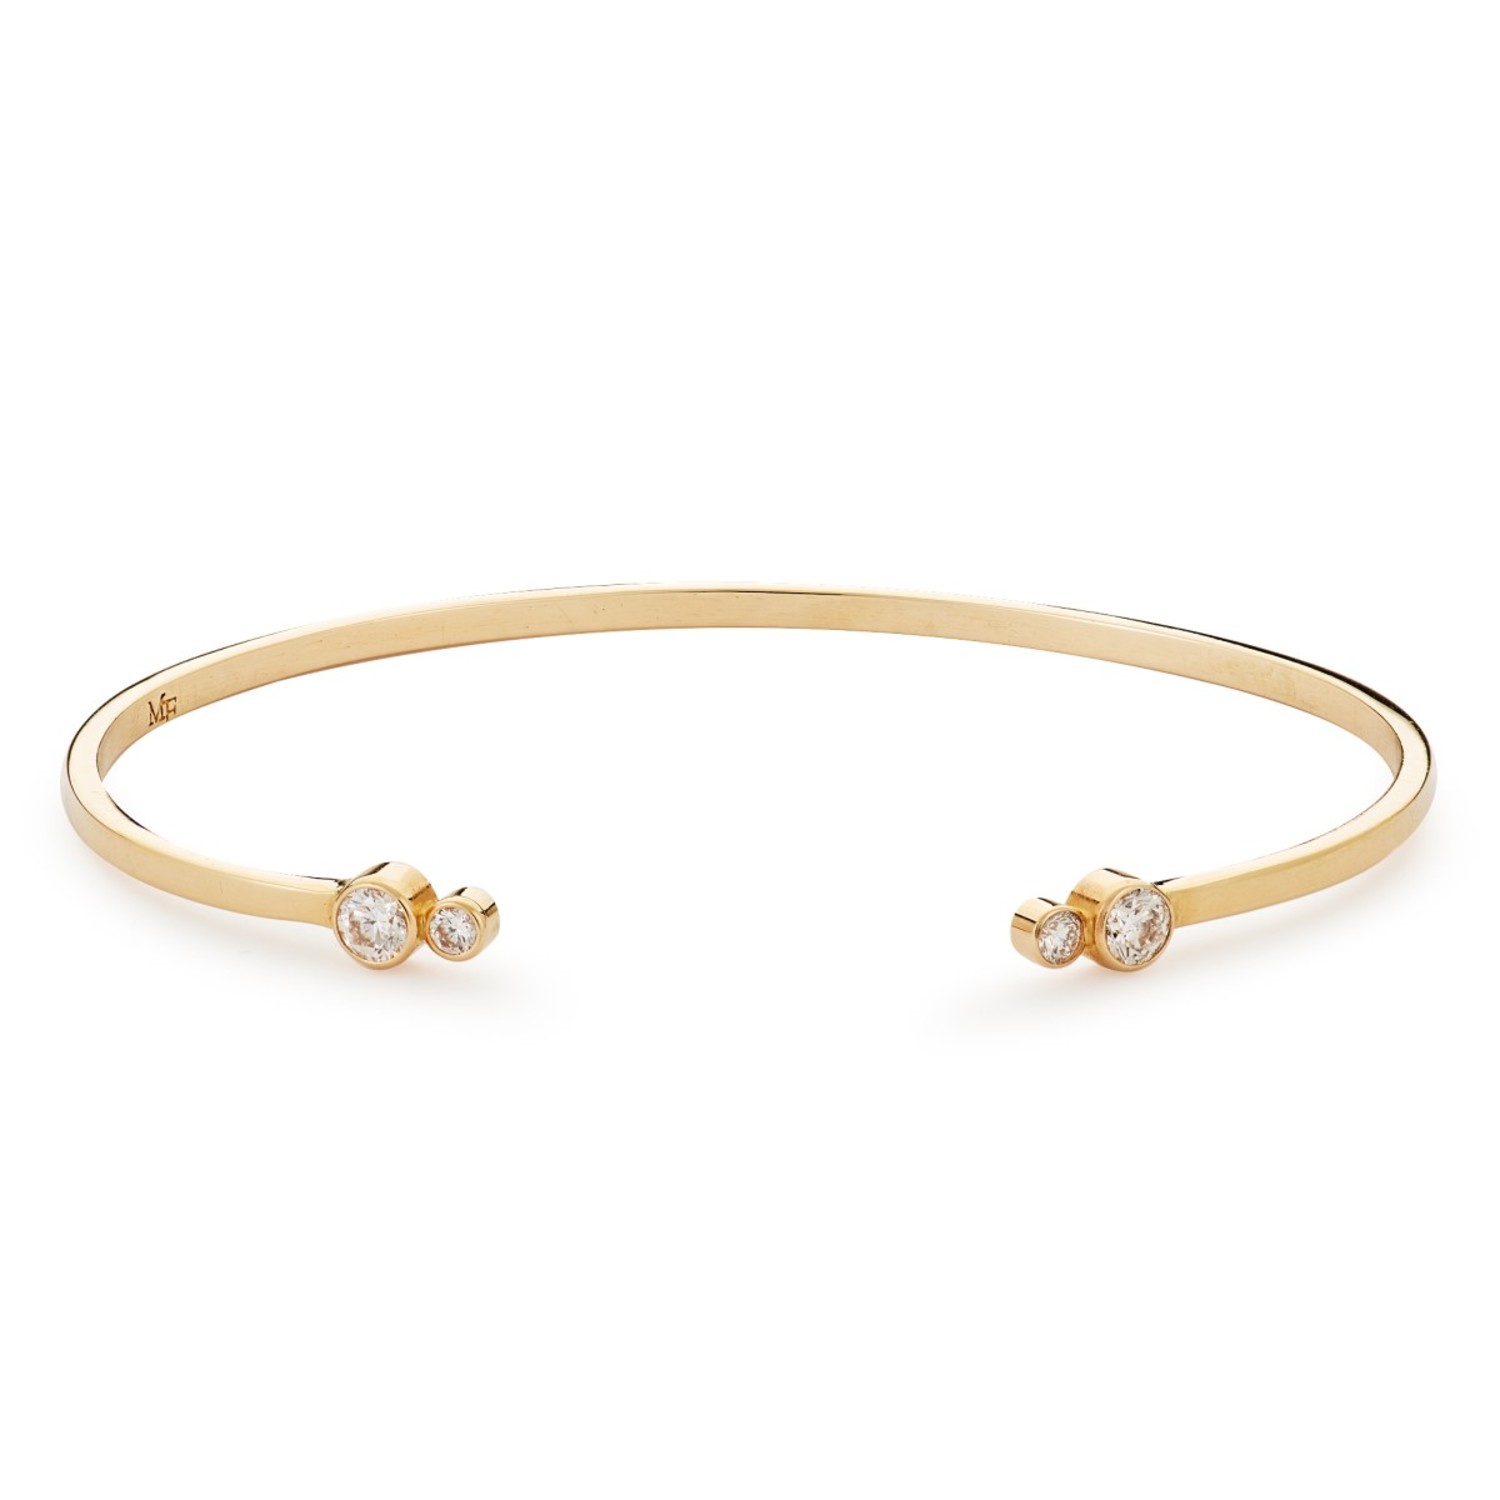 Doublette Cuff in 14K Yellow Gold